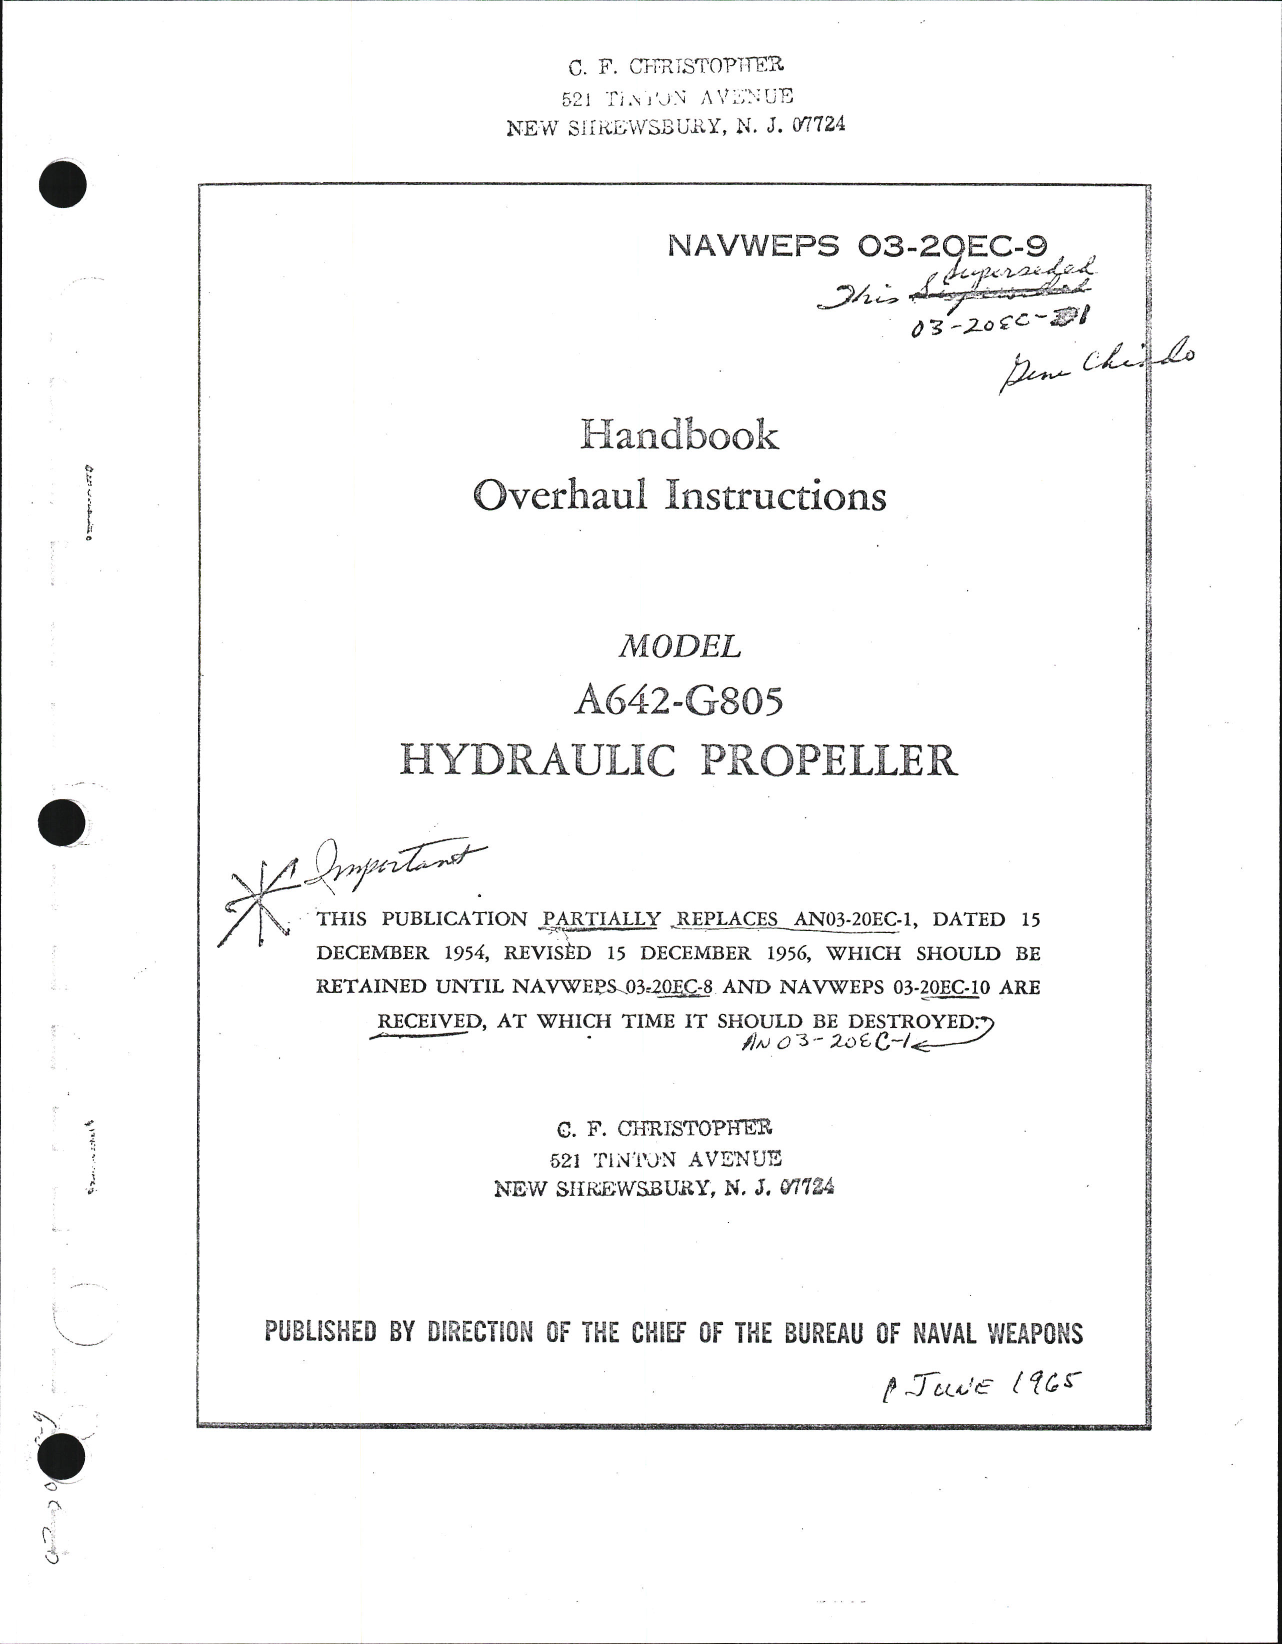 Sample page 1 from AirCorps Library document: Overhaul Instructions for Allison Hydraulic Propeller Model A642-G805